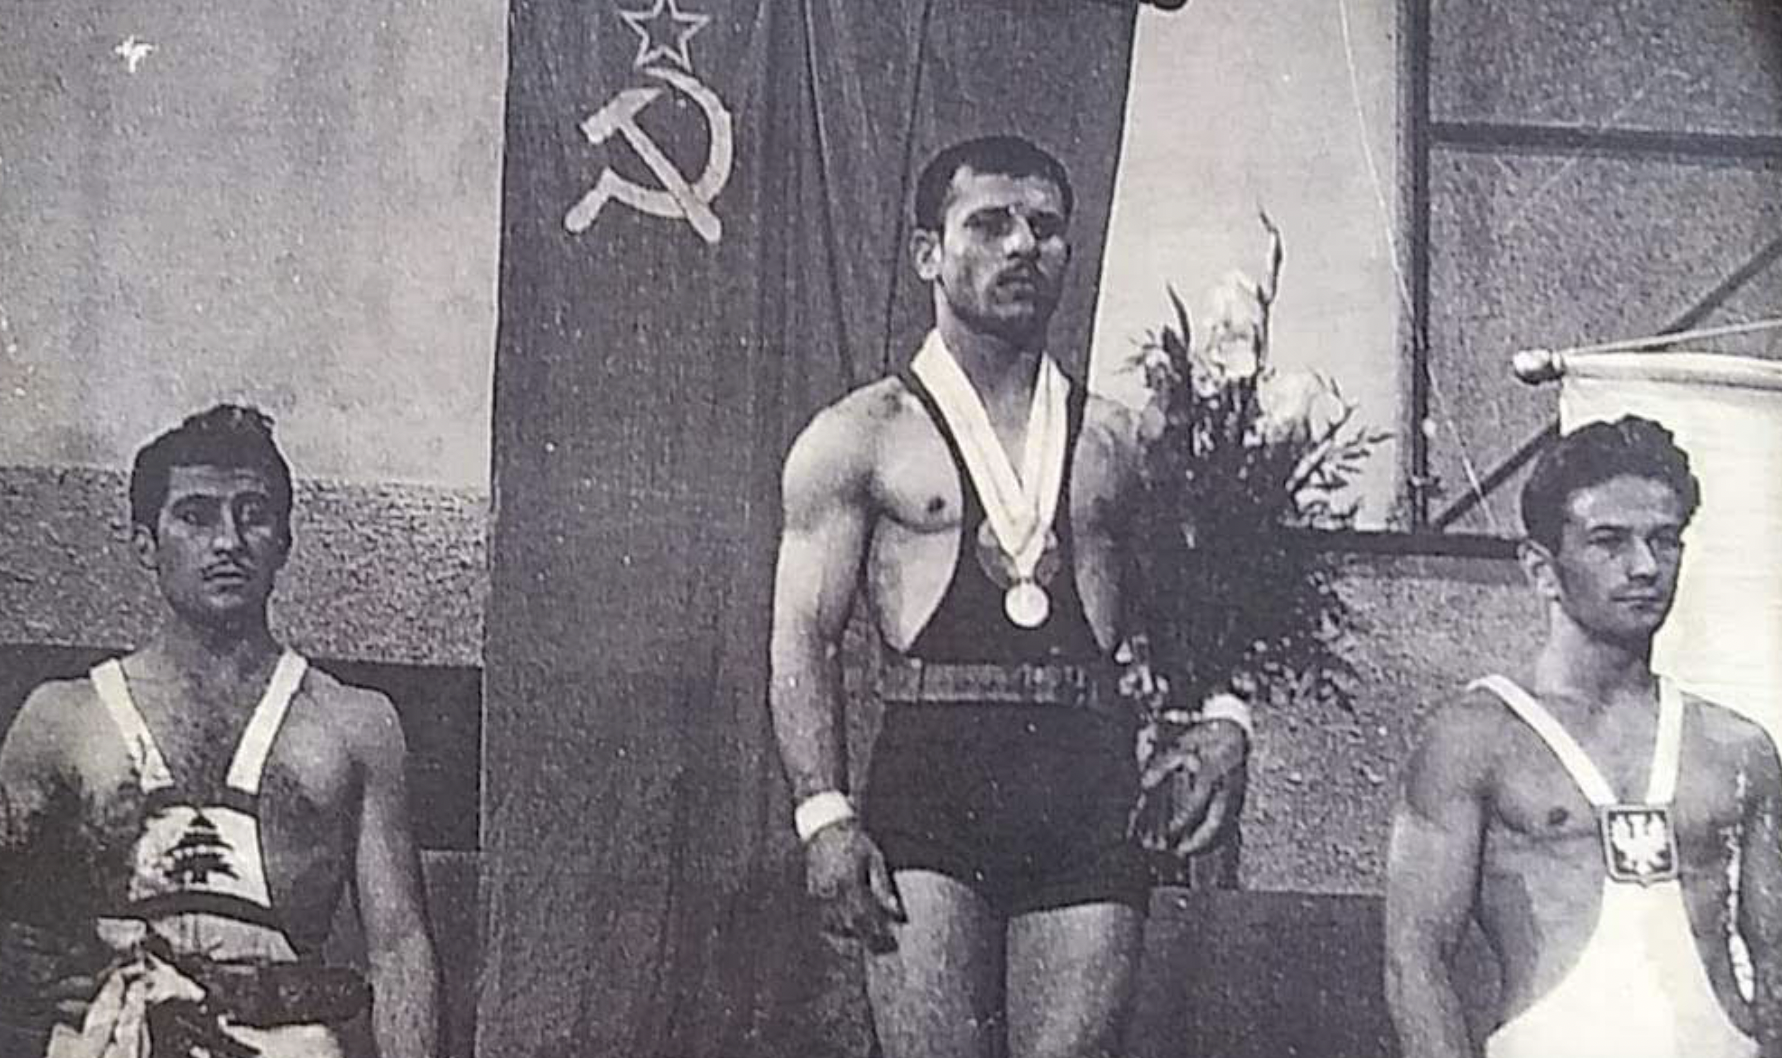 Tchobanian, left, on the podium alongside athletes from the Soviet Union and Poland following a competition in Budapest, Hungary ©ITG